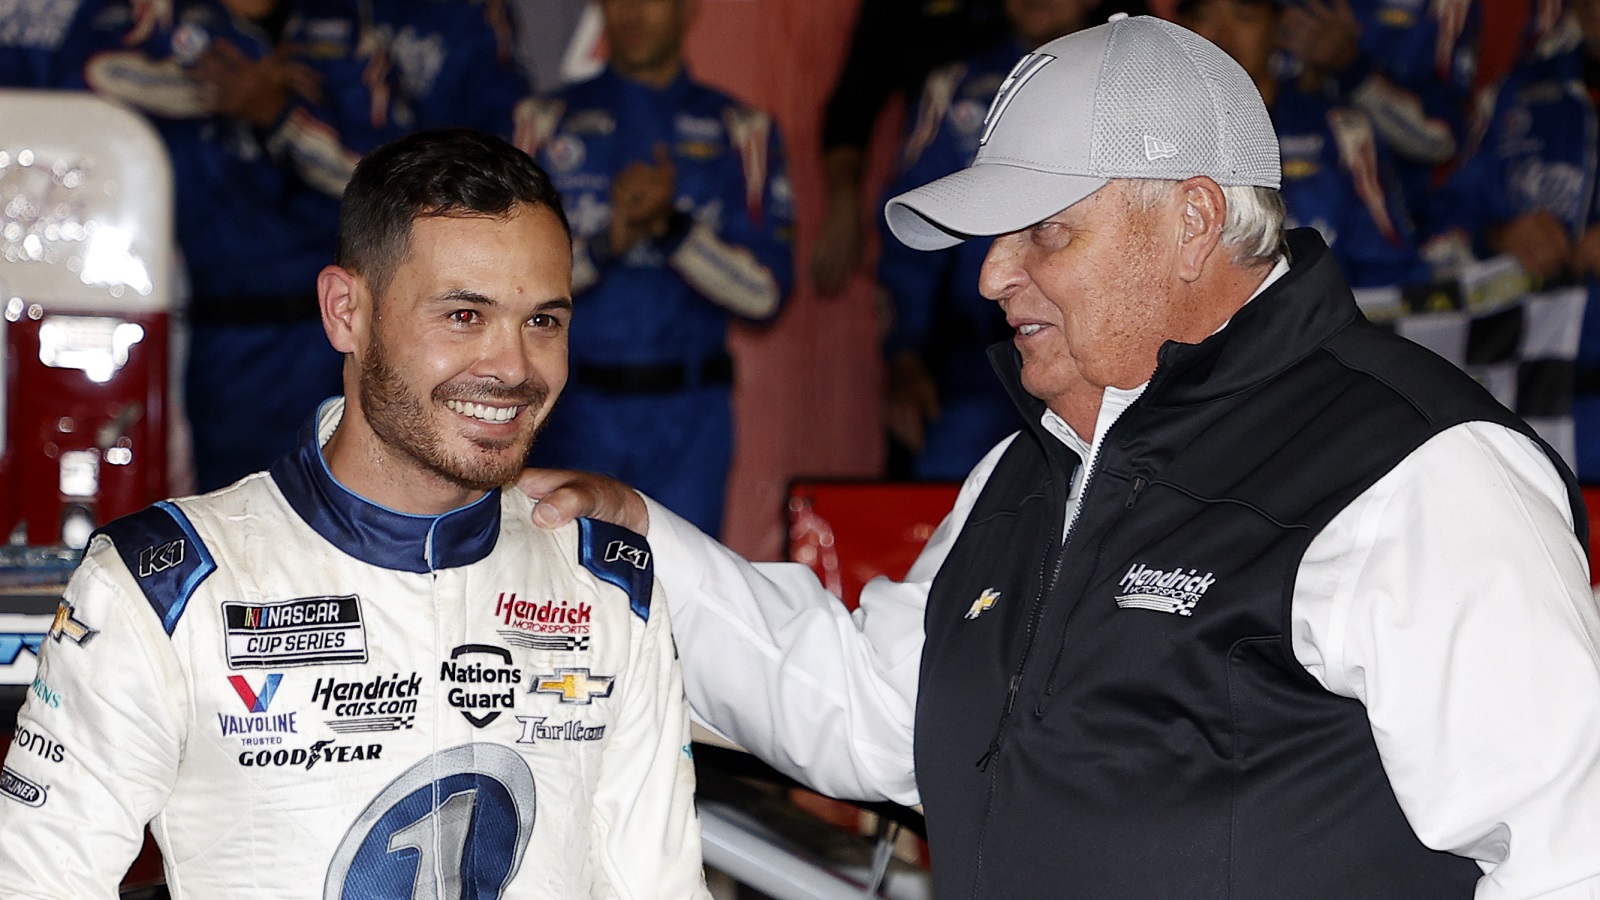 Kyle Larson and NASCAR Hall of Famer and team owner Rick Hendrick celebrate after winning the NASCAR Cup Series Coca-Cola 600 on May 30, 2021. | Maddie Meyer/Getty Images